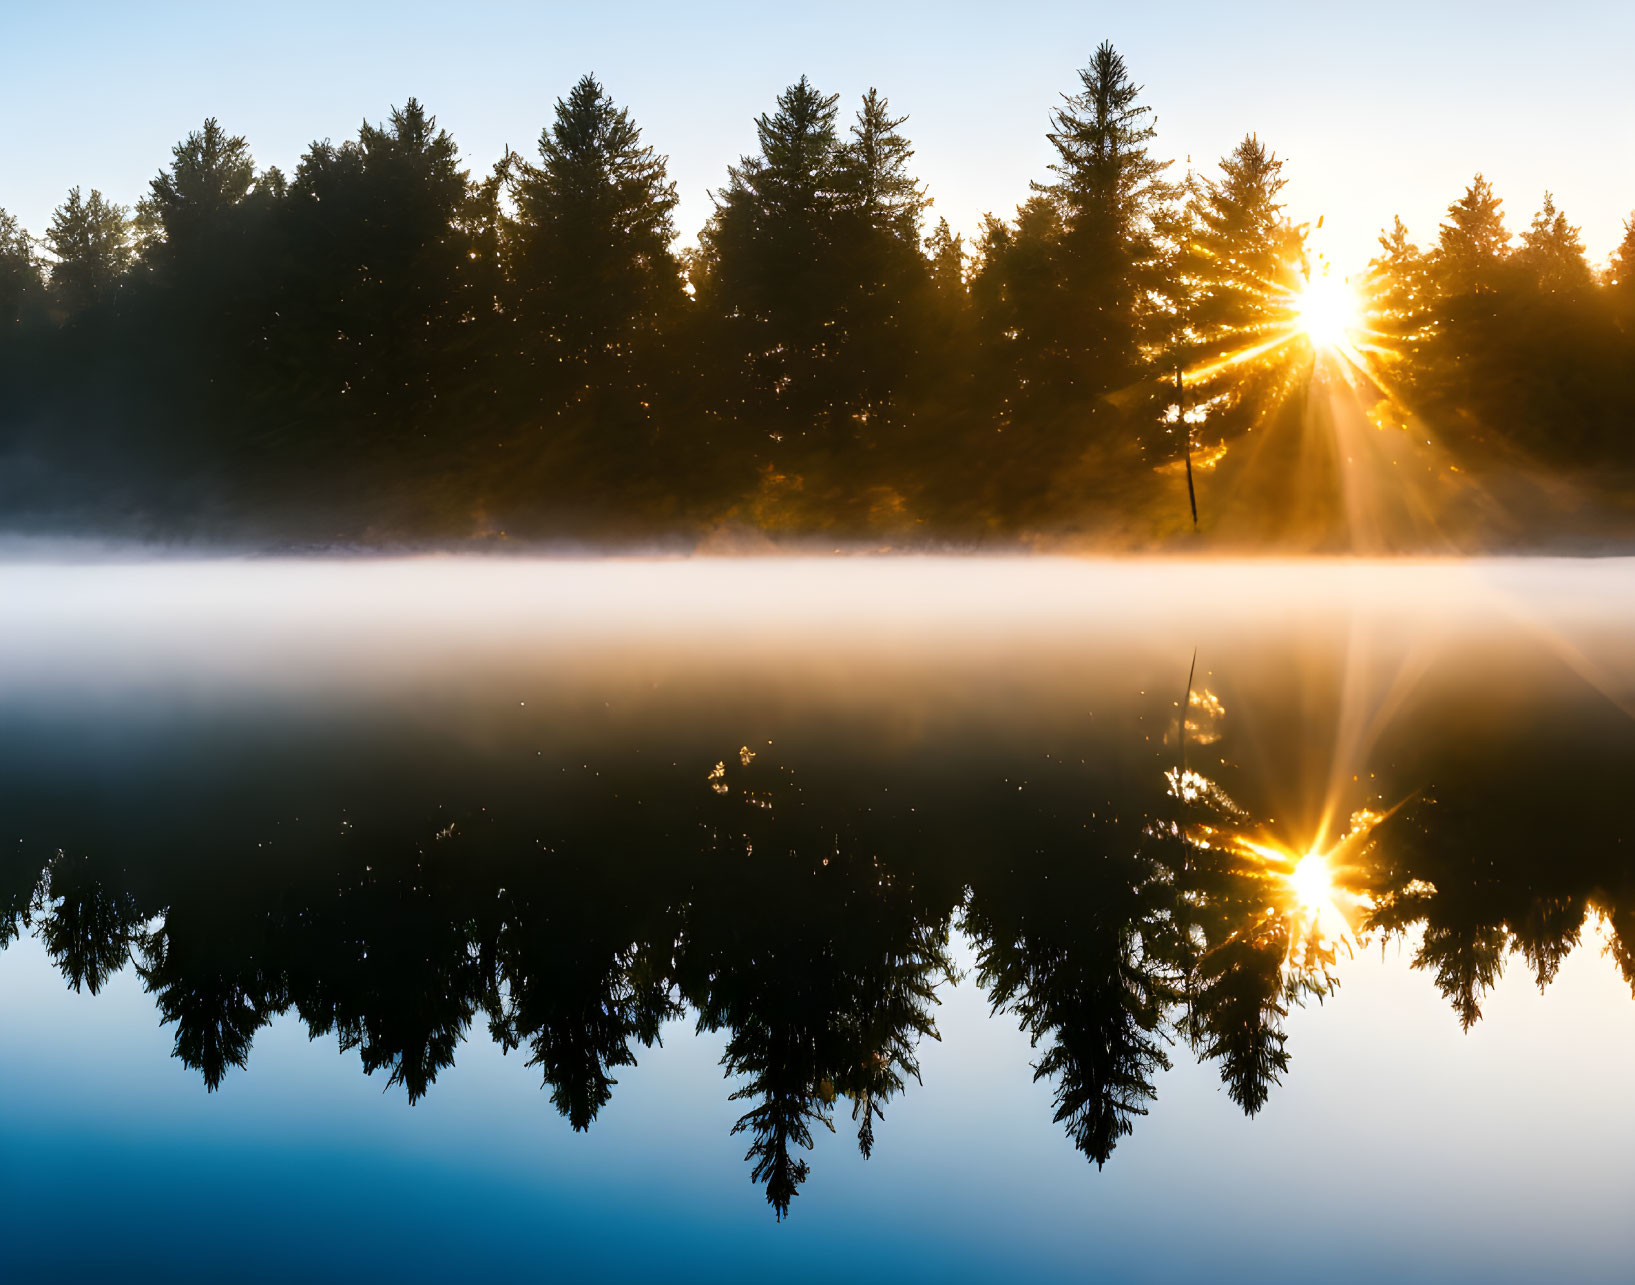 Scenic sunrise over tranquil lake with mist and mirrored reflection